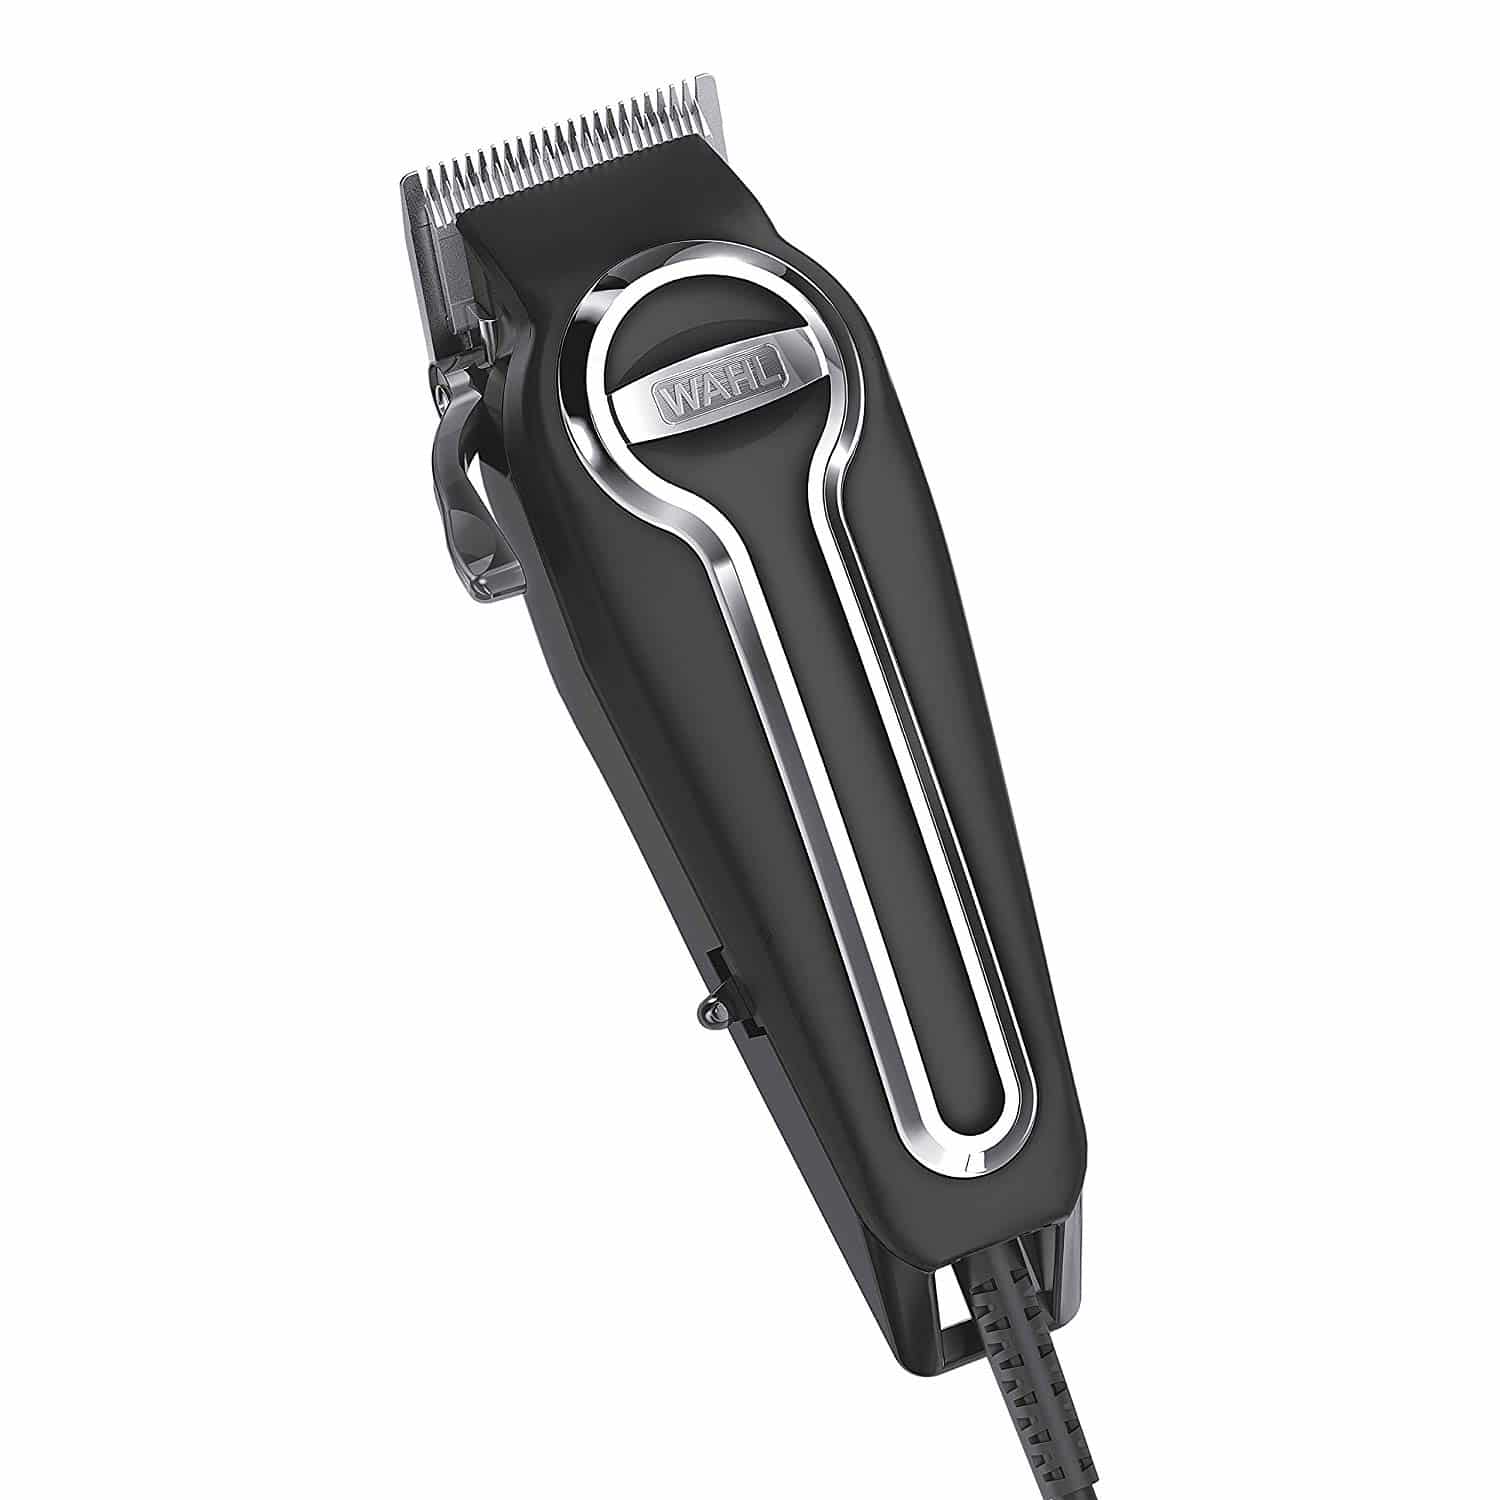 Top 10 Best Hair Clippers in 2020 Reviews I Guides